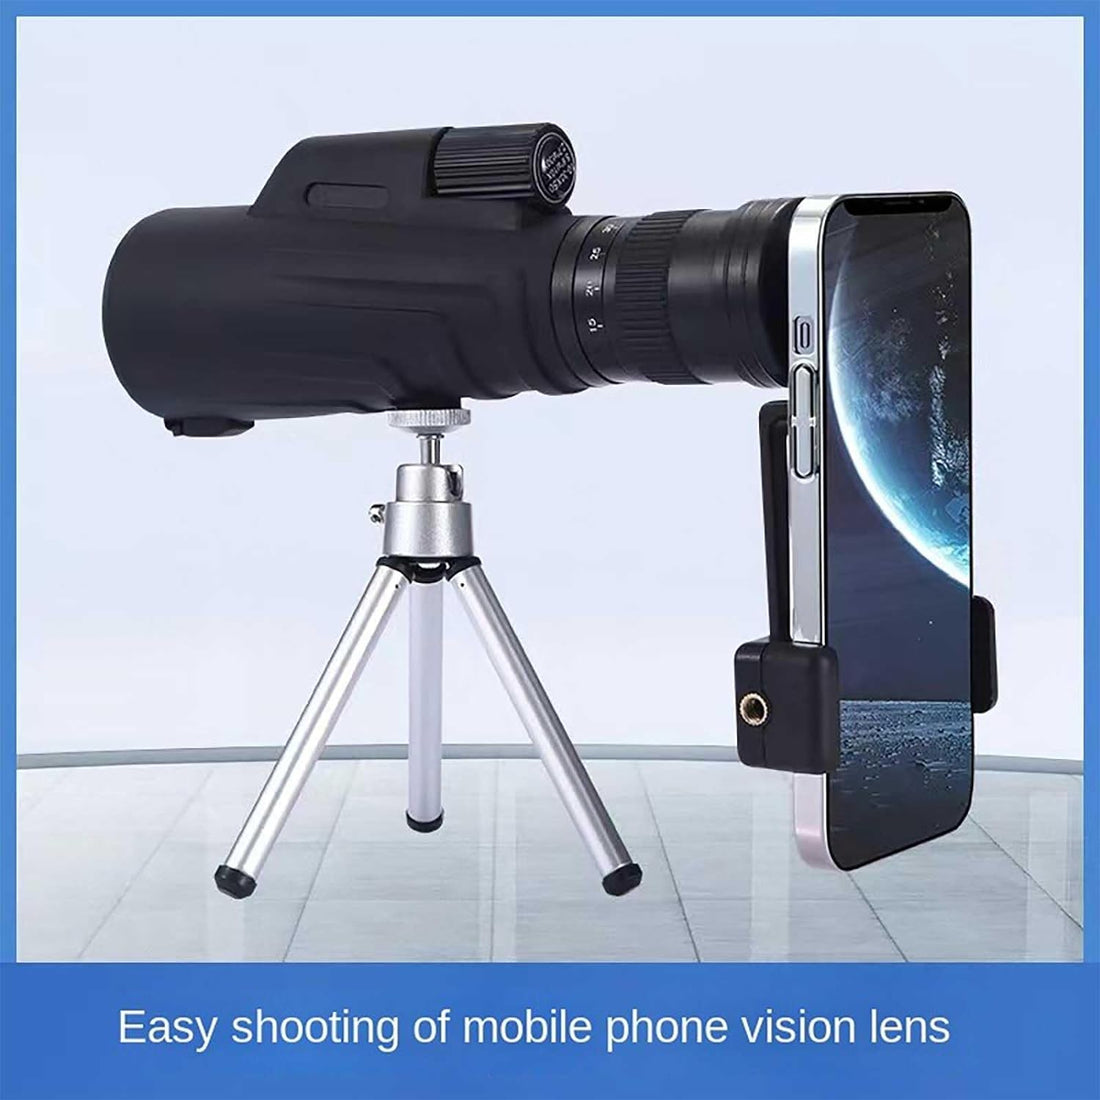 10-30 * 50 Zoom Monoculars for Adults High Powered, with a Smartphone Clip and a Tripod, Bak-4 Prism & Fmc Lens，Suitable for Bird Watching, Hunting, Camping, Hiking, Traveling